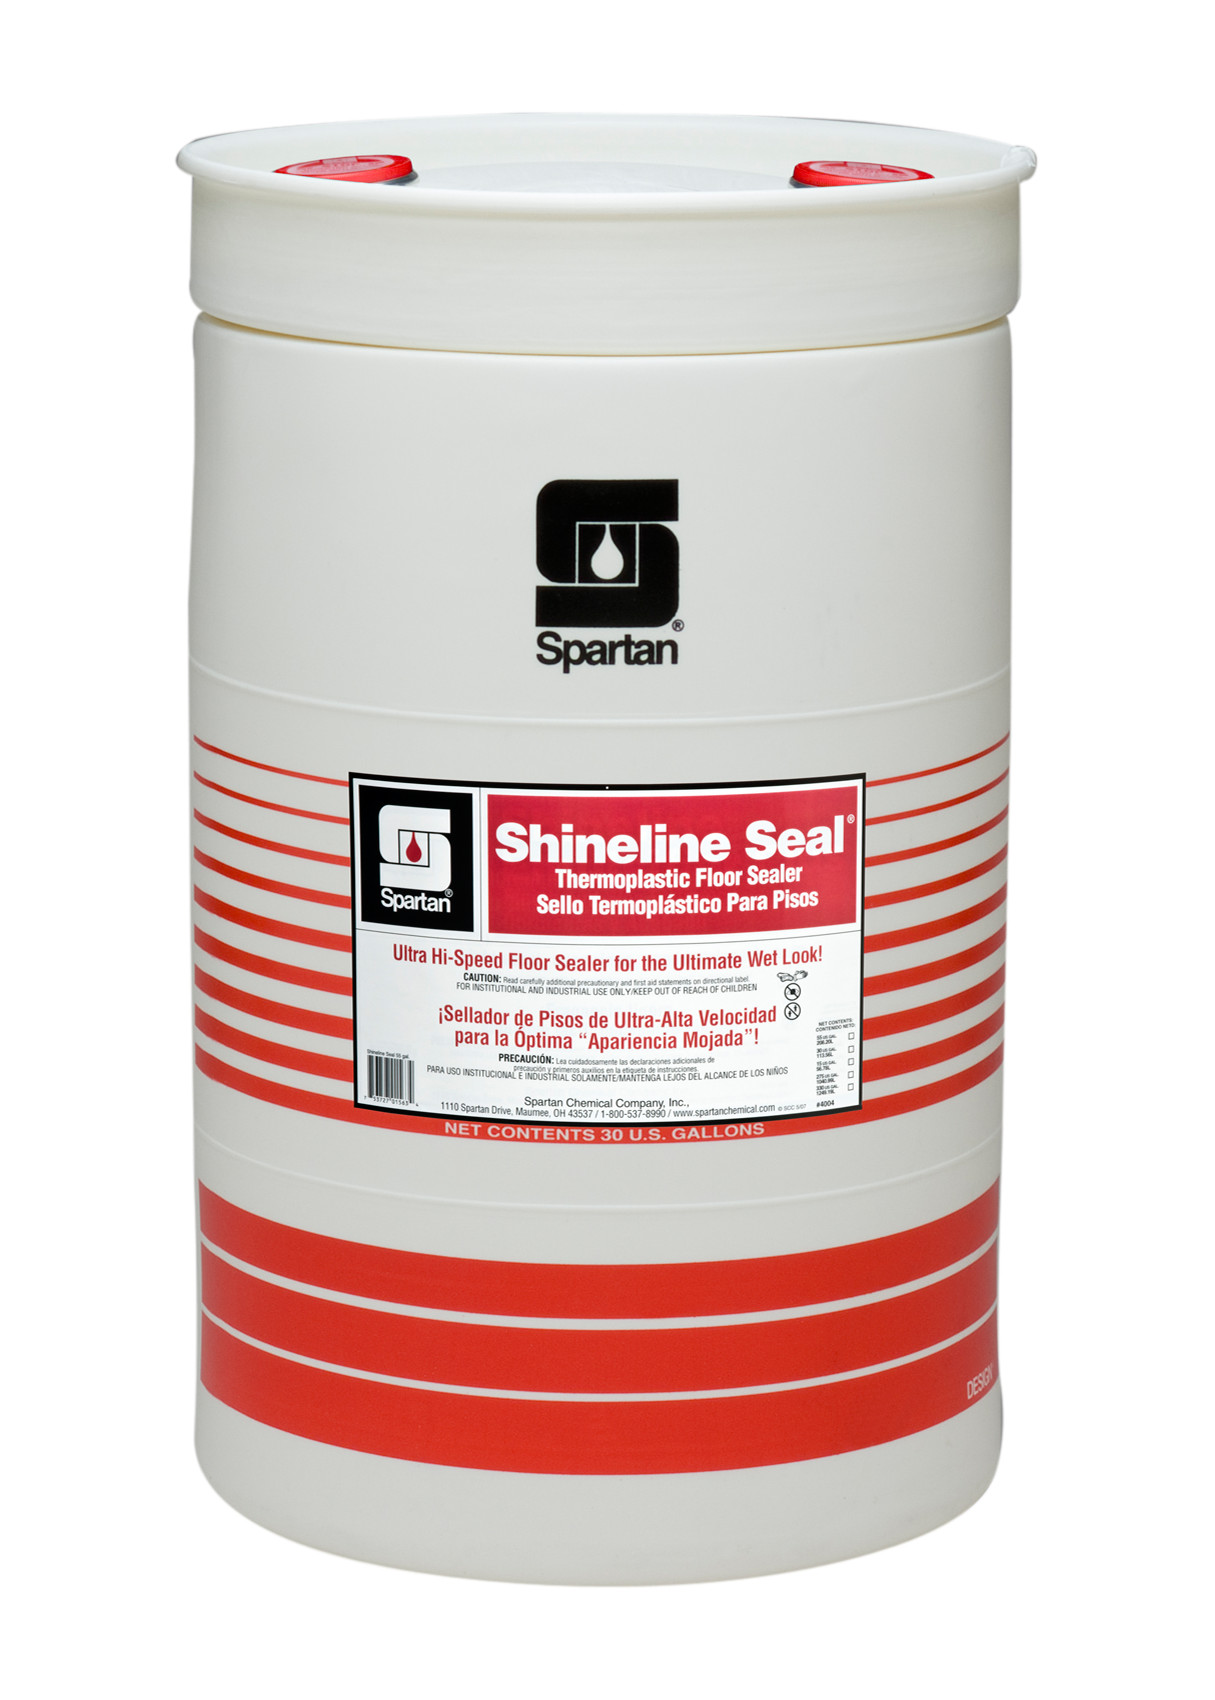 Spartan Chemical Company Shineline Seal, 30 GAL DRUM